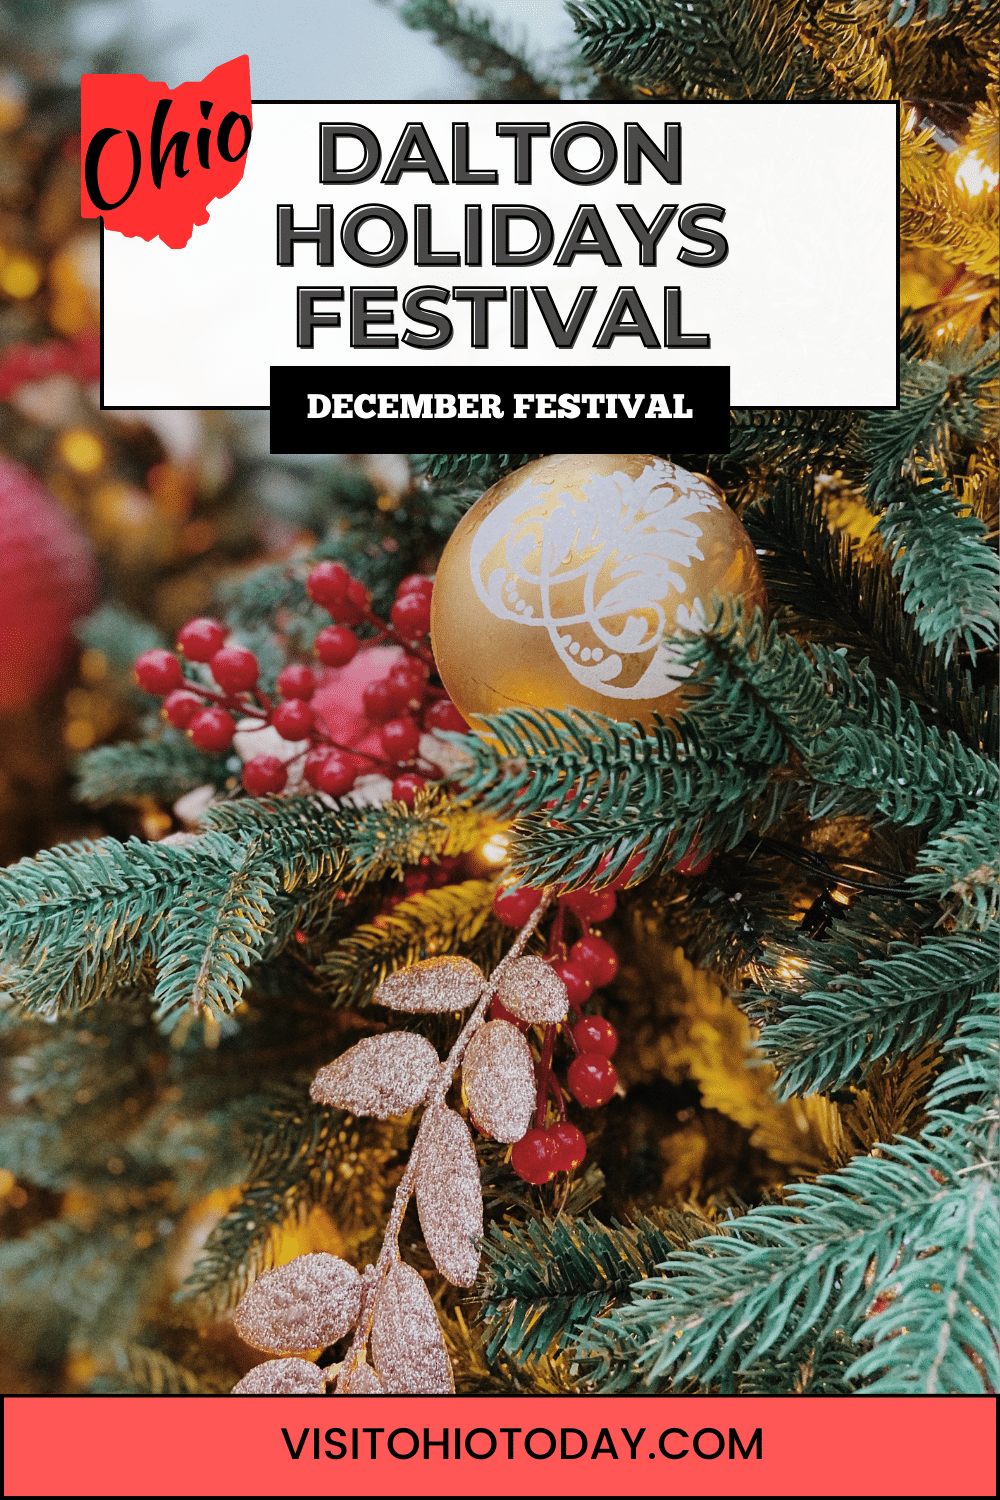 The Dalton Holidays Festival is held in Downtown Dalton and at Dalton High School on the first weekend of December.